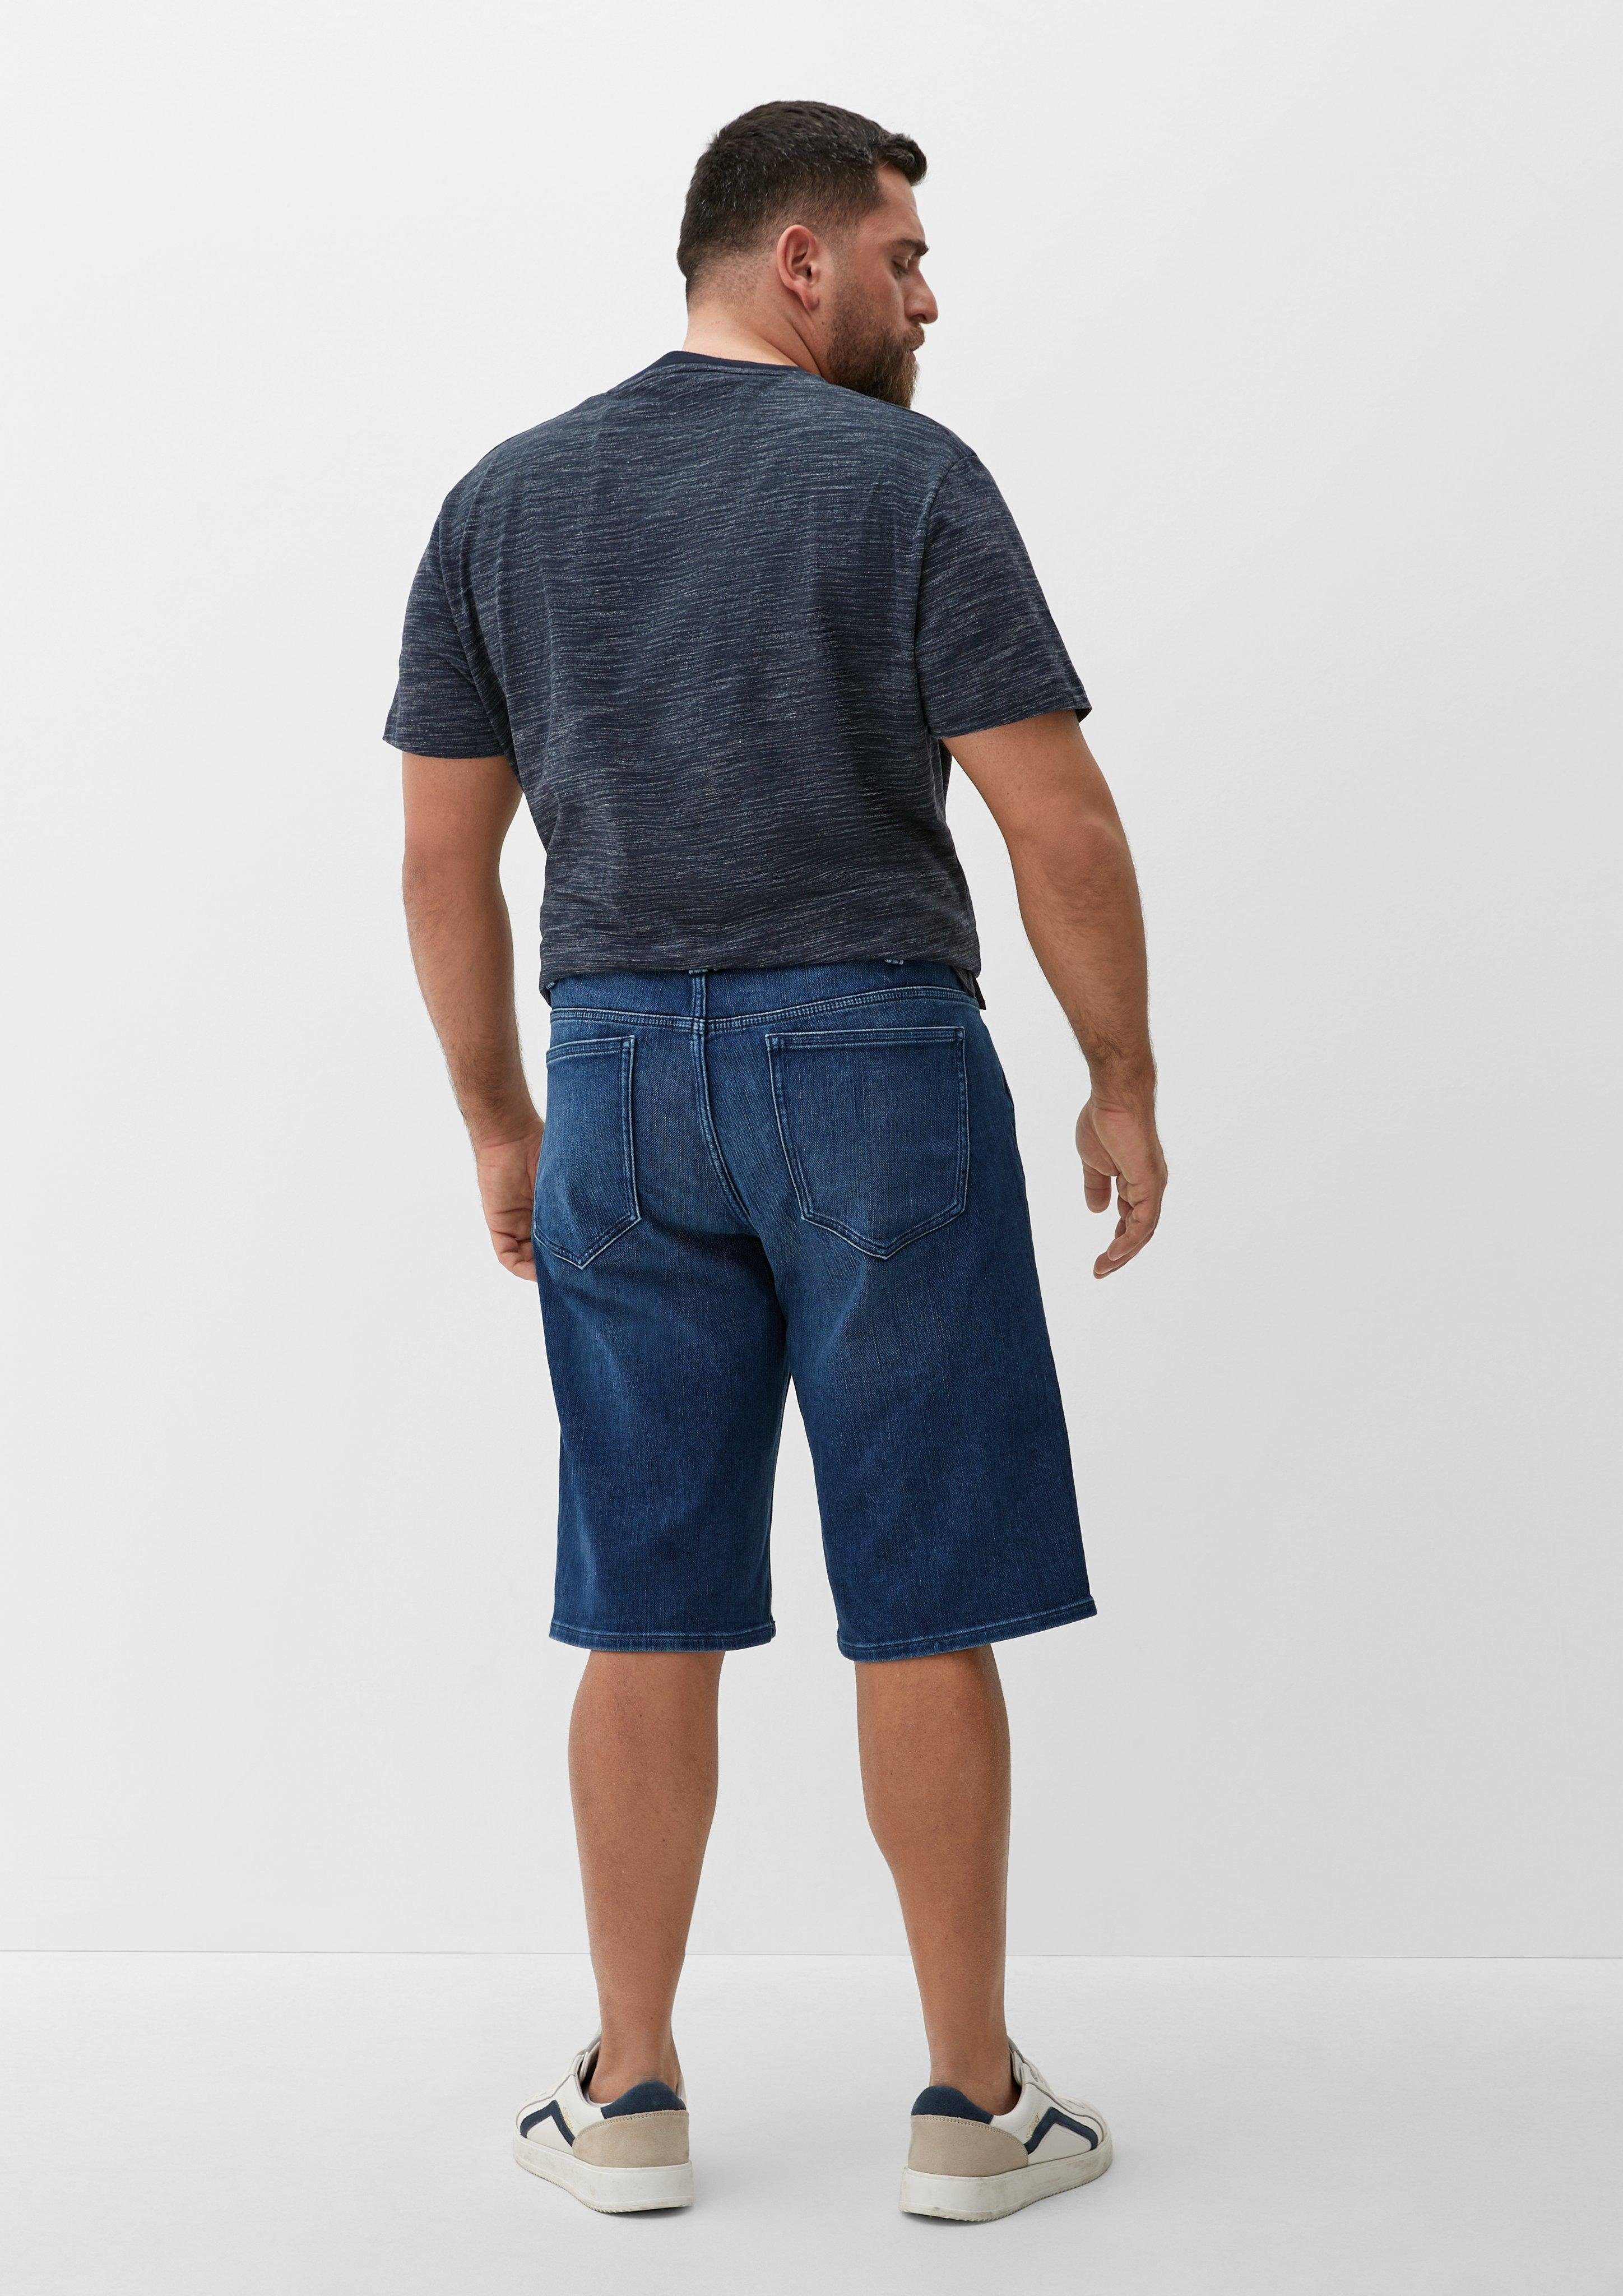 Rise Jeansshorts / Mid Fit / Leg Casby s.Oliver Relaxed Straight / Jeans-Shorts tiefblau